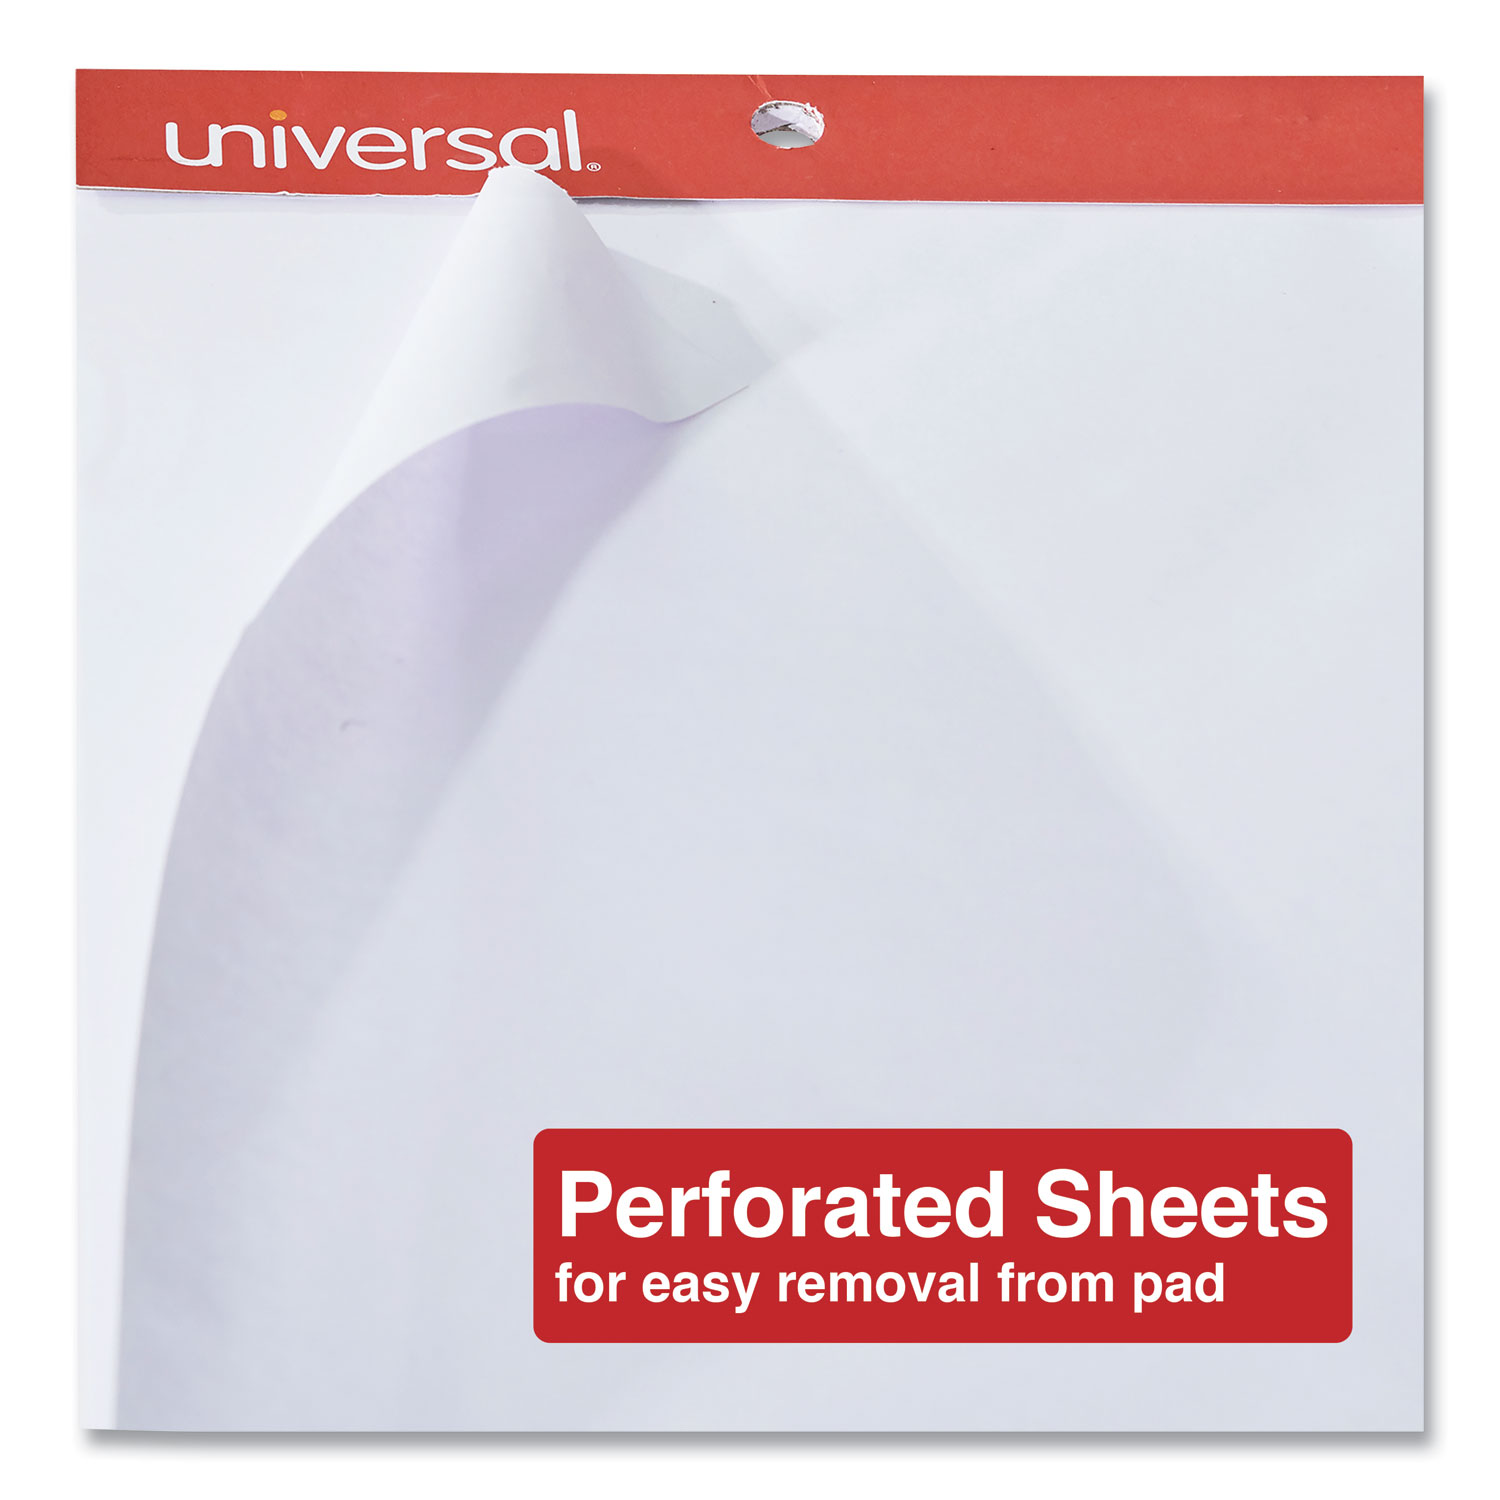 Universal 35600 Recycled Easel Pads Unruled 27 X 34 White 50 Sheet Case of 2 for sale online 